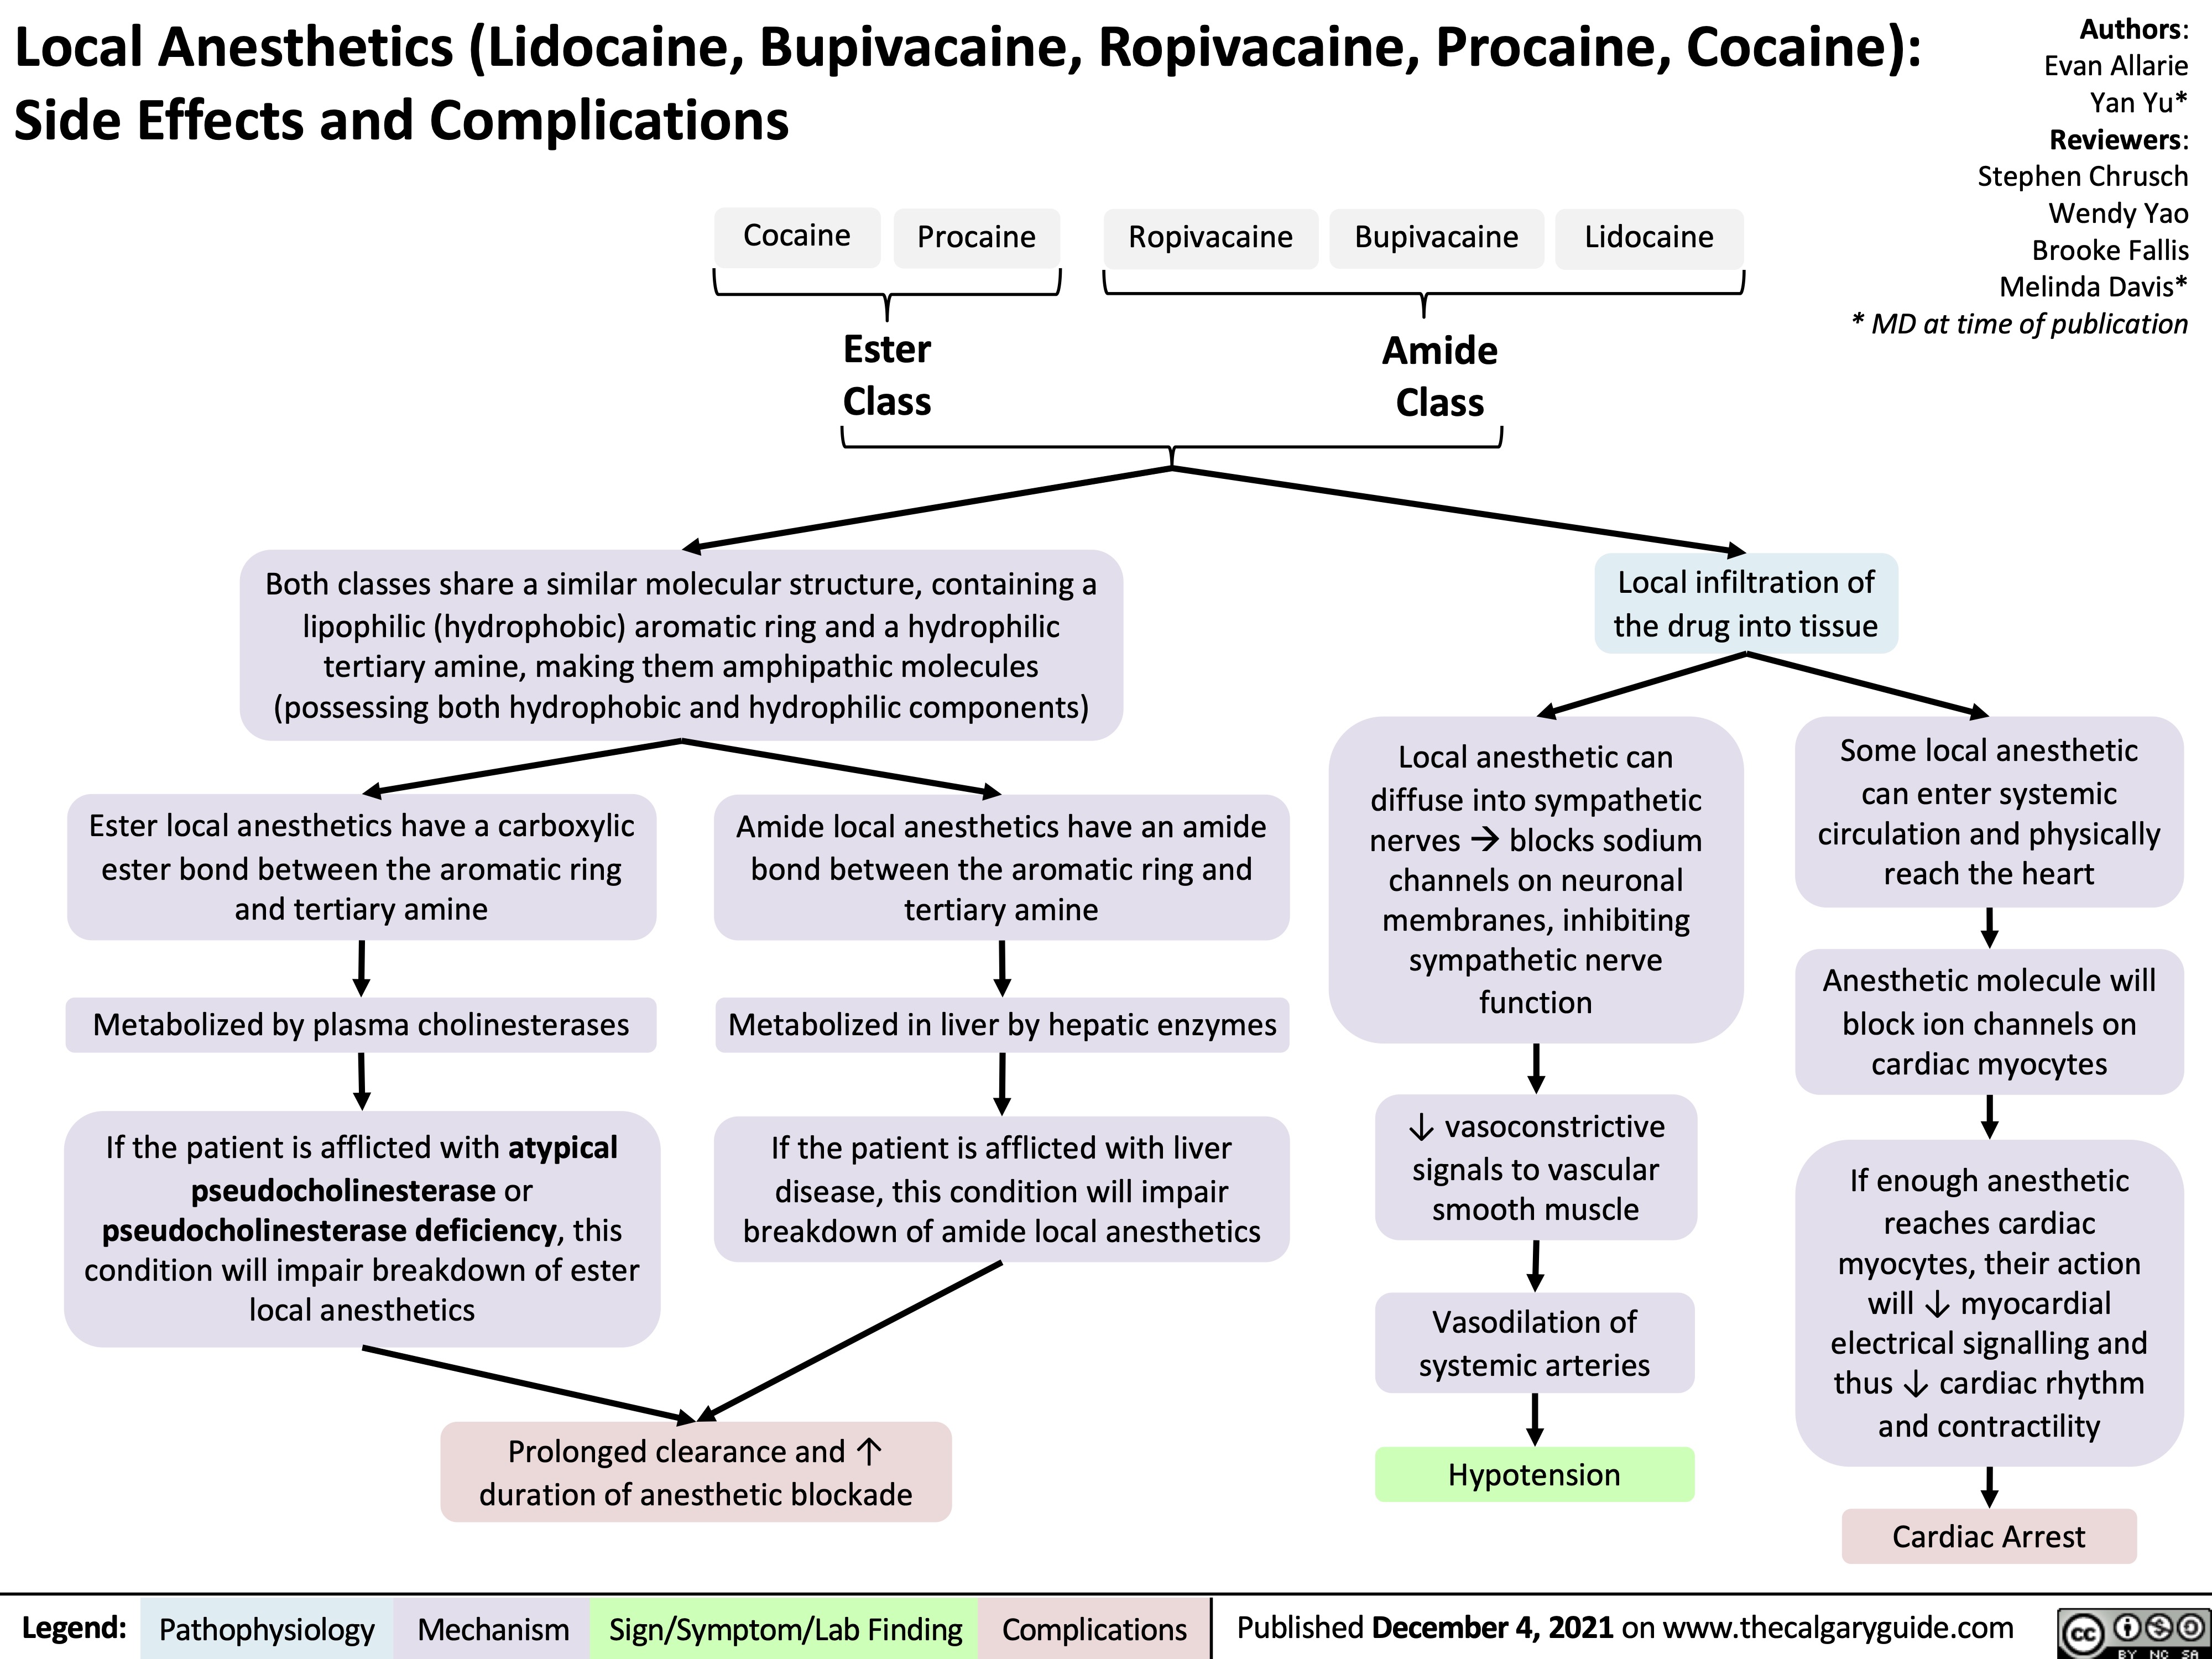 Local Anesthetics (Lidocaine, Bupivacaine, Ropivacaine, Procaine, Cocaine): Side Effects and Complications
     Cocaine
Procaine
Ropivacaine
Bupivacaine
Amide Class
Lidocaine
Authors: Evan Allarie Yan Yu* Reviewers: Stephen Chrusch Wendy Yao Brooke Fallis Melinda Davis* * MD at time of publication
  Ester Class
Both classes share a similar molecular structure, containing a lipophilic (hydrophobic) aromatic ring and a hydrophilic tertiary amine, making them amphipathic molecules (possessing both hydrophobic and hydrophilic components)
Local infiltration of the drug into tissue
            Ester local anesthetics have a carboxylic ester bond between the aromatic ring and tertiary amine
Metabolized by plasma cholinesterases If the patient is afflicted with atypical
pseudocholinesterase or pseudocholinesterase deficiency, this condition will impair breakdown of ester local anesthetics
Amide local anesthetics have an amide bond between the aromatic ring and tertiary amine
Metabolized in liver by hepatic enzymes
If the patient is afflicted with liver disease, this condition will impair breakdown of amide local anesthetics
Local anesthetic can diffuse into sympathetic nervesàblocks sodium channels on neuronal membranes, inhibiting sympathetic nerve function
↓ vasoconstrictive signals to vascular smooth muscle
Vasodilation of systemic arteries
Hypotension
Some local anesthetic can enter systemic circulation and physically reach the heart
Anesthetic molecule will block ion channels on cardiac myocytes
If enough anesthetic reaches cardiac myocytes, their action will ↓ myocardial electrical signalling and thus ↓ cardiac rhythm and contractility
           Prolonged clearance and ↑ duration of anesthetic blockade
  Cardiac Arrest
 Legend:
 Pathophysiology
Mechanism
Sign/Symptom/Lab Finding
 Complications
Published December 4, 2021 on www.thecalgaryguide.com
    